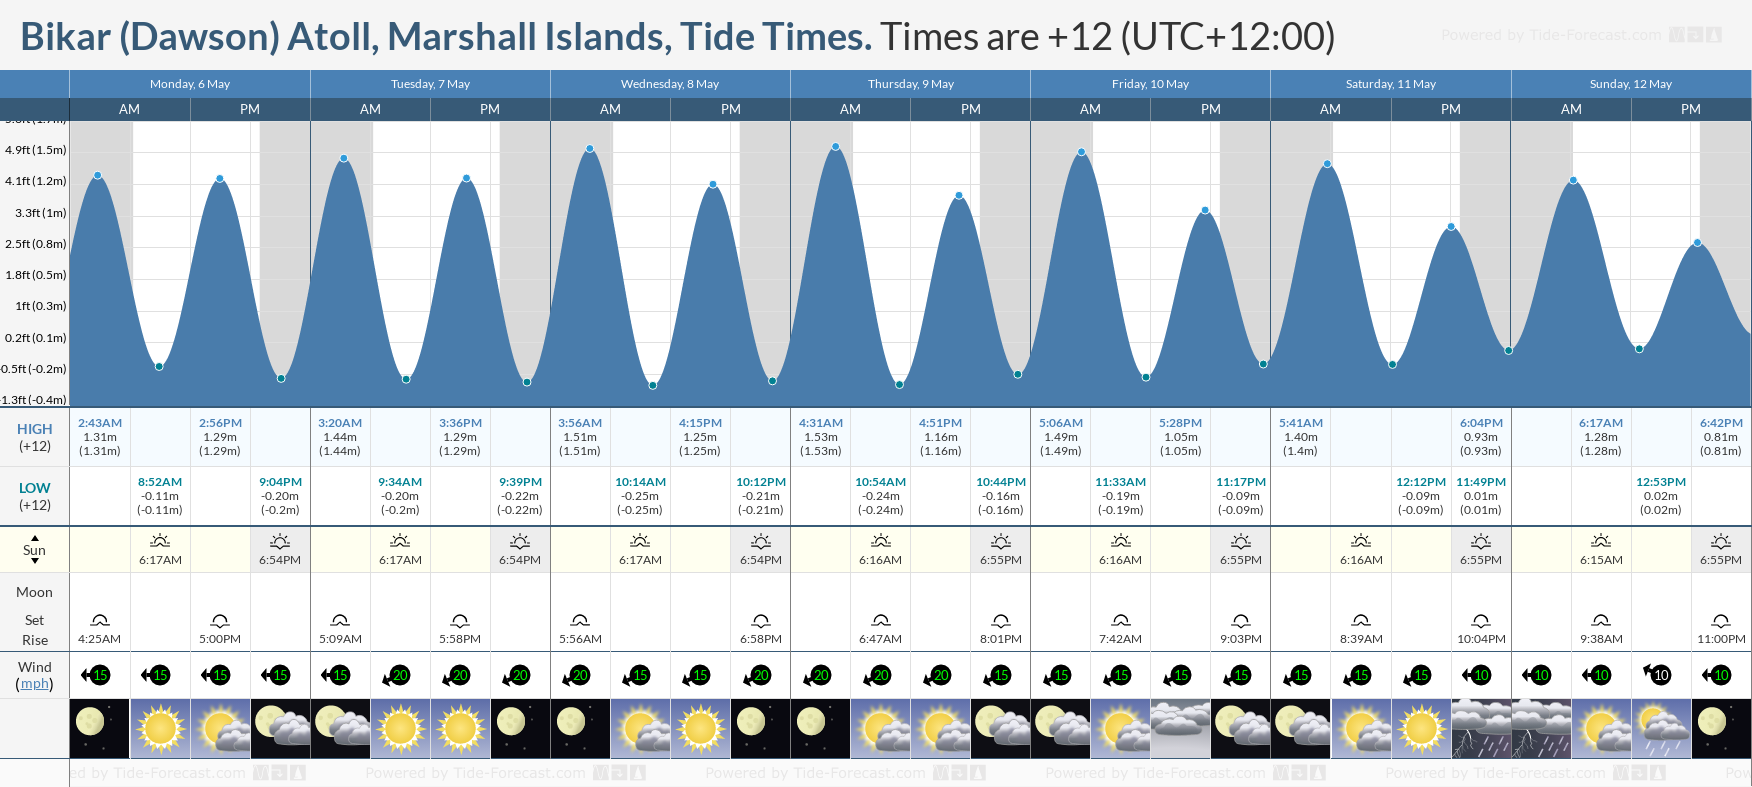 Bikar (Dawson) Atoll, Marshall Islands Tide Chart including high and low tide tide times for the next 7 days